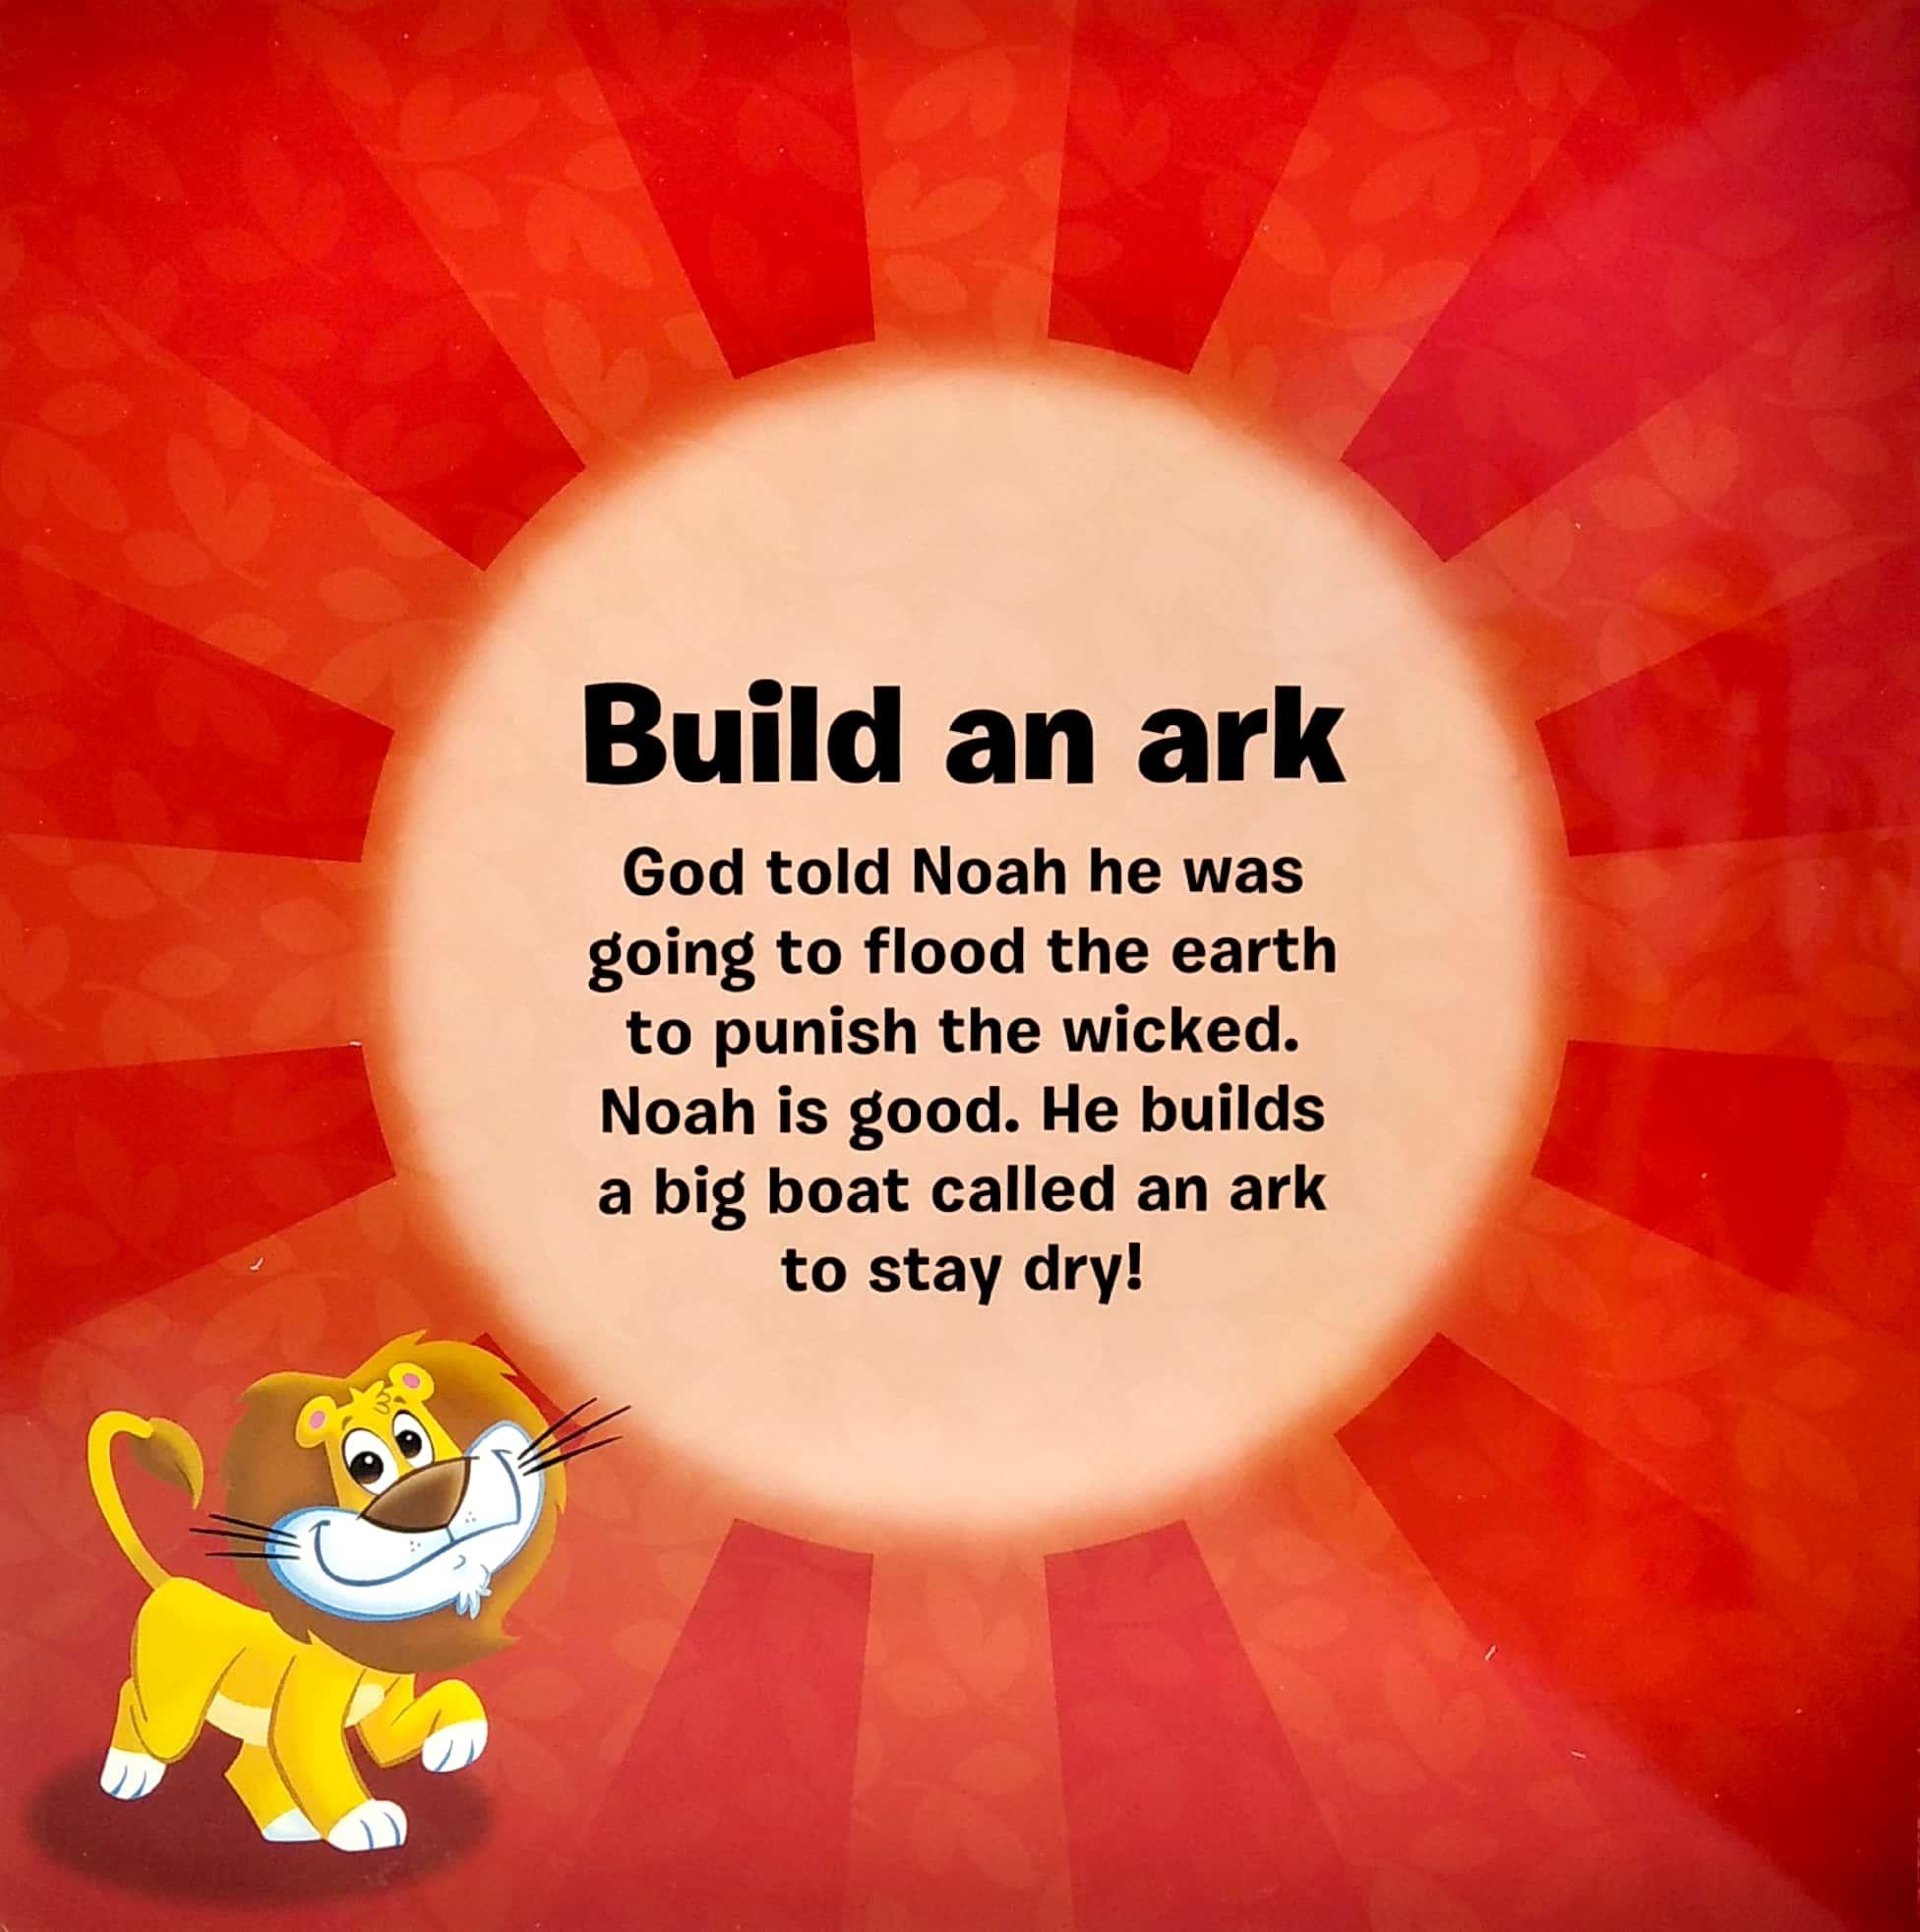 My First Puzzle Book: Noah's Ark